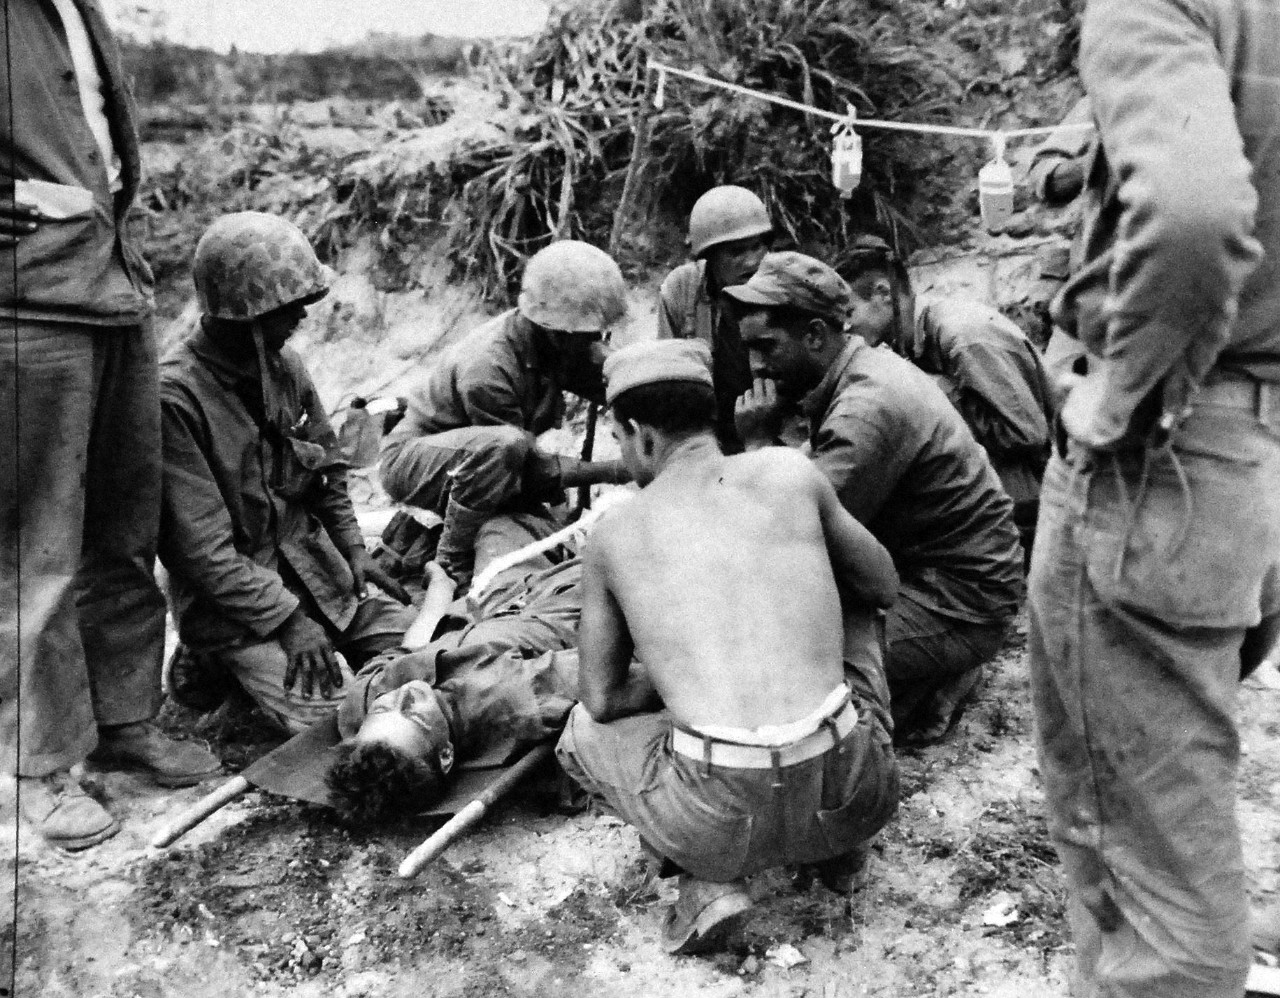 127-GW-667-120316:  Okinawa Campaign, April-June 1945.   U.S. Navy Corpsmen giving blood plasma.  This picture was made while under snipe and mortar fire.  Two Corpsmen were killed five minutes after this picture was made.   Photographed by Corporal MacIntosh, 1945. Official U.S. Marine Photograph, now in the collection of the National Archives.  (2014/7/23). 